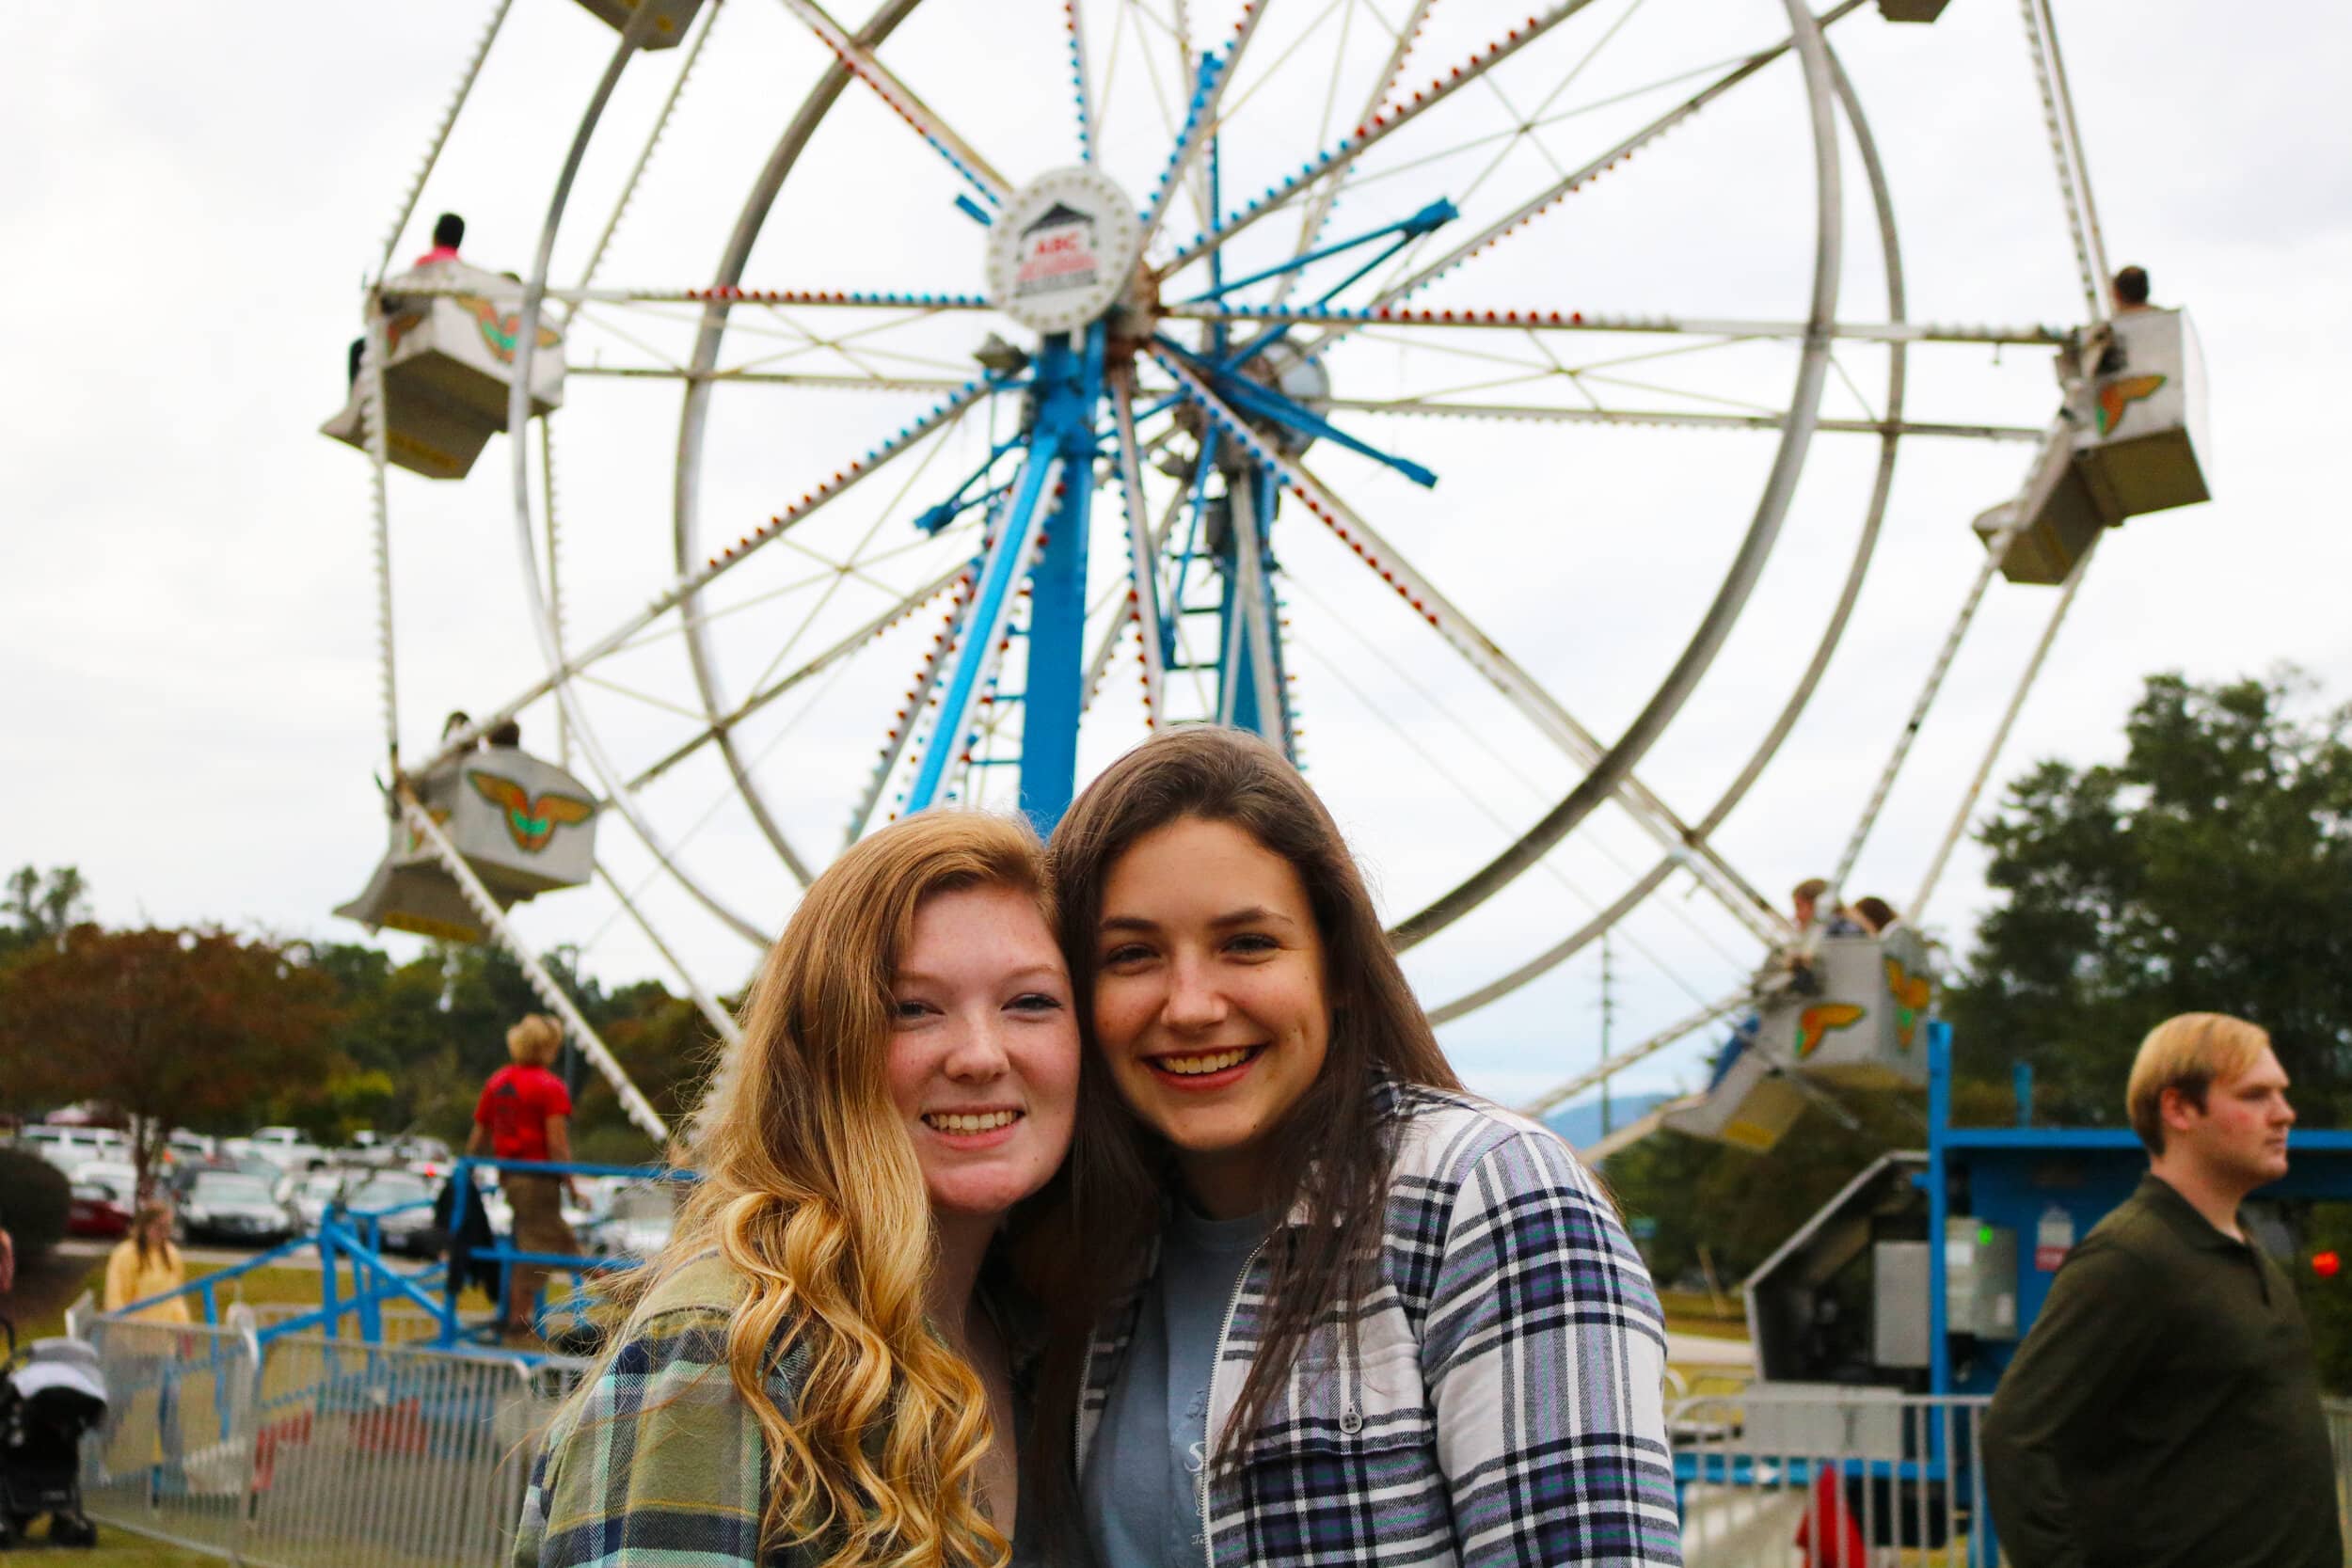 Sophomores Katelyn Watson and Lauren Gilliland pose for a picture in front of the Ferris wheel.